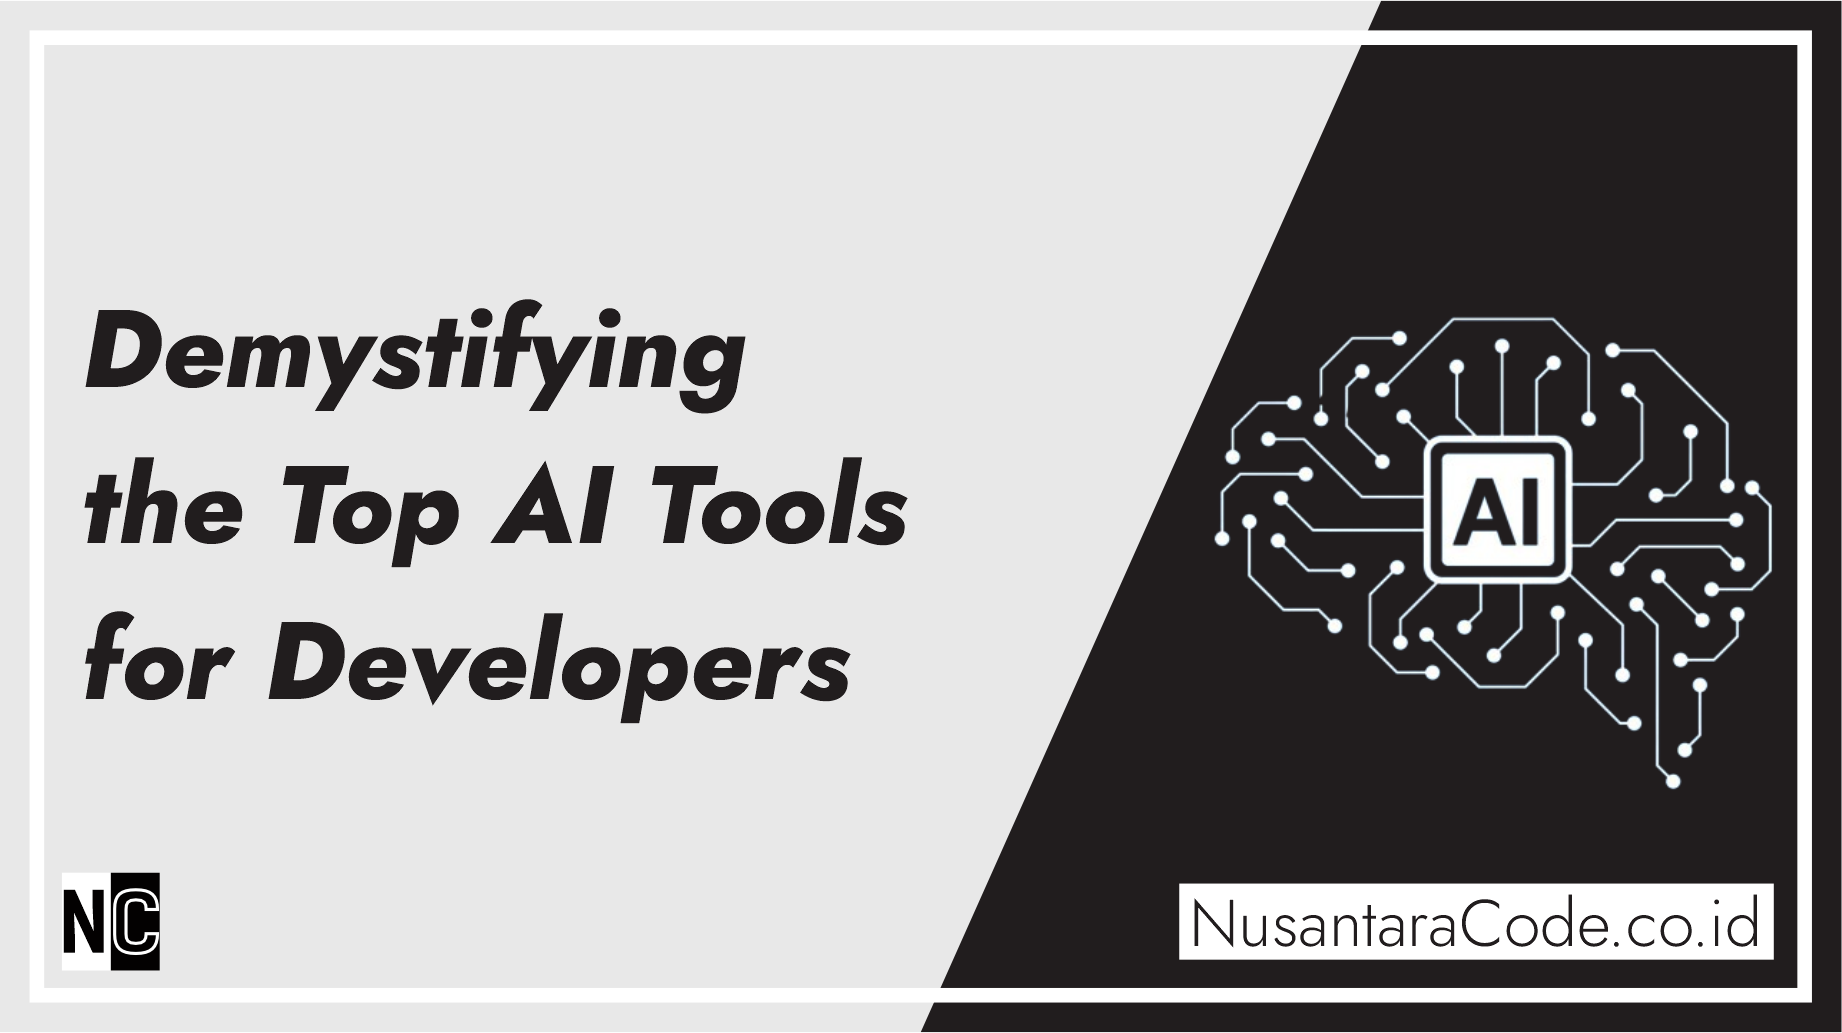 Demystifying the Top AI Tools for Developers